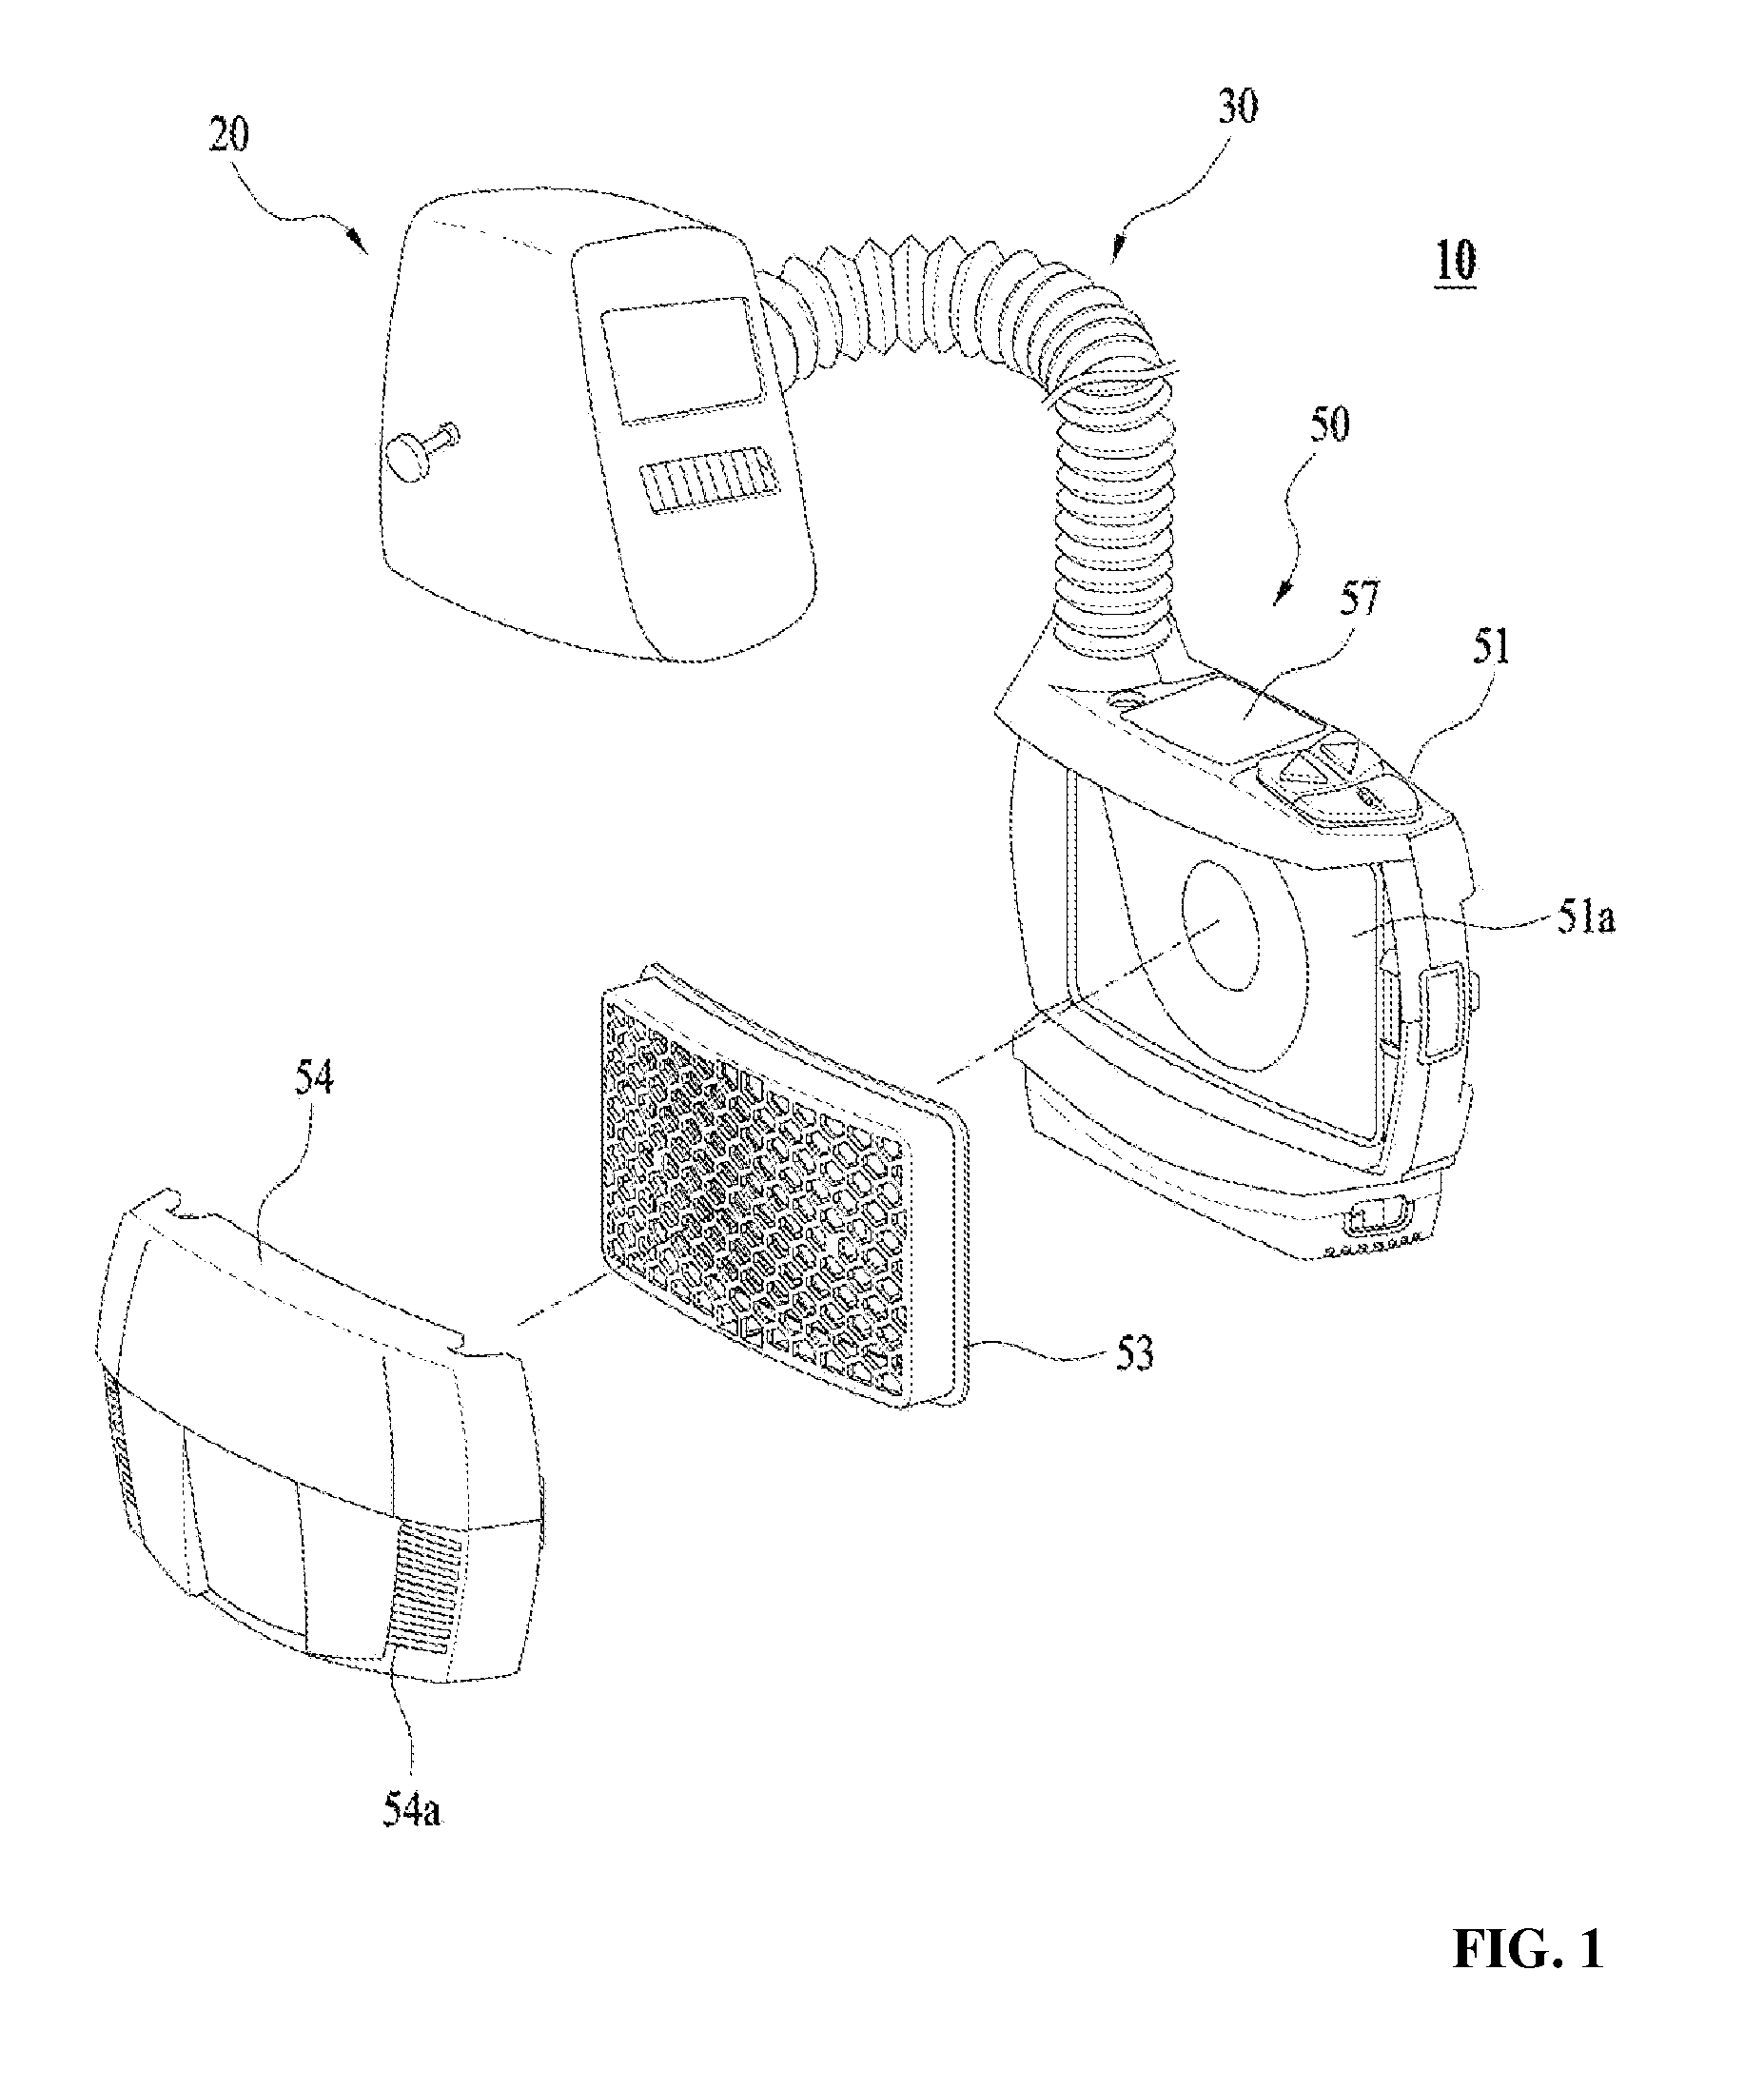 Structure and Method For Recognizing Information on a Filter Installed in an Air Purifier of a Respirator